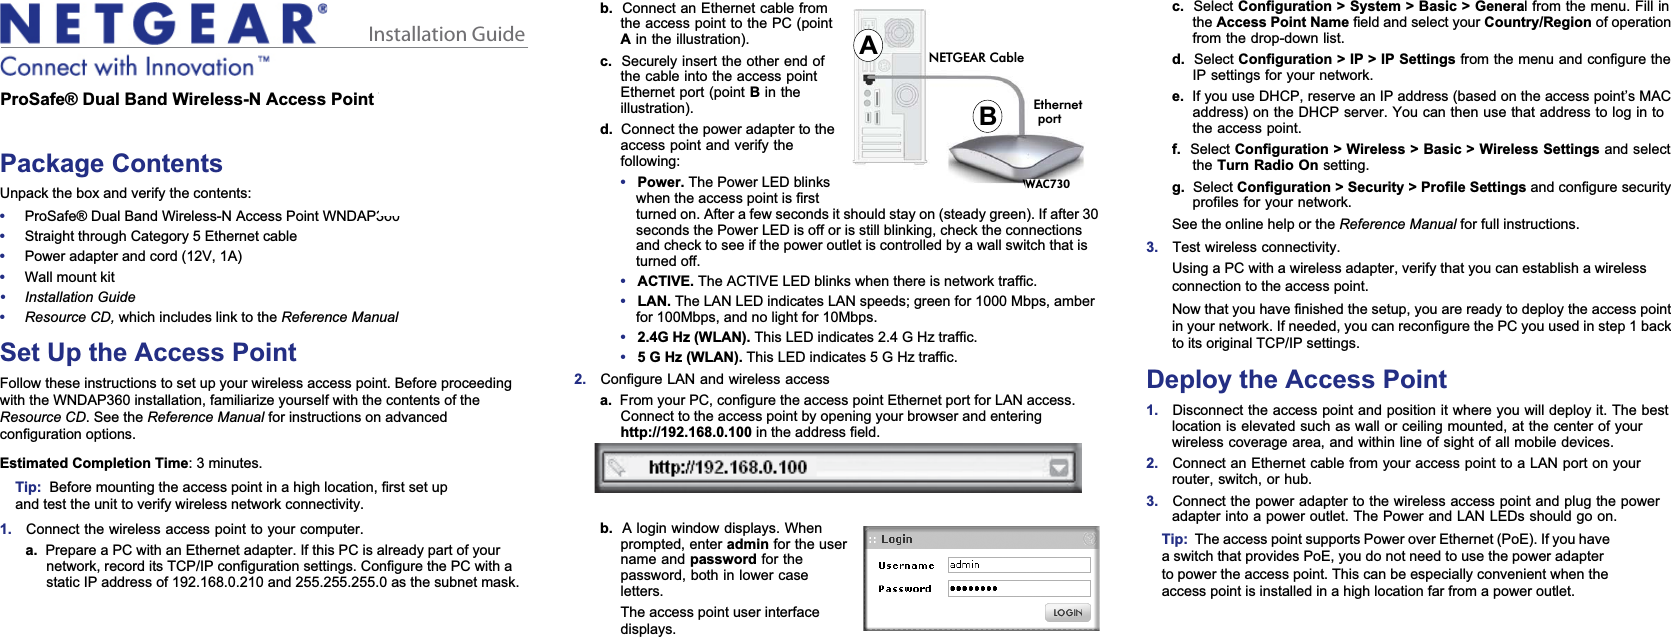 Installation Guideb. Connect an Ethernet cable from the access point to the PC (point Ain the illustration).c. Securely insert the other end of the cable into the access point Ethernet port (point Bin the illustration).d. Connect the power adapter to the access point and verify the following:•Power. The Power LED blinks when the access point is first turned on. After a few seconds it should stay on (steady green). If after 30 seconds the Power LED is off or is still blinking, check the connections and check to see if the power outlet is controlled by a wall switch that is turned off.•ACTIVE. The ACTIVE LED blinks when there is network traffic. •LAN. The LAN LED indicates LAN speeds; green for 1000 Mbps, amber for 100Mbps, and no light for 10Mbps. •2.4G Hz (WLAN). This LED indicates 2.4 G Hz traffic.•5 G Hz (WLAN). This LED indicates 5 G Hz traffic.2. Configure LAN and wireless accessa. From your PC, configure the access point Ethernet port for LAN access. Connect to the access point by opening your browser and entering http://192.168.0.100 in the address field. b. A login window displays. When prompted, enter admin for the user name and password for the password, both in lower case letters.The access point user interface displays.NETGEAR CableABWNDAP360Ethernetportc. Select Configuration &gt; System &gt; Basic &gt; General from the menu. Fill in the Access Point Name field and select your Country/Region of operation from the drop-down list.d. Select Configuration &gt; IP &gt; IP Settings from the menu and configure the IP settings for your network.e. If you use DHCP, reserve an IP address (based on the access point’s MAC address) on the DHCP server. You can then use that address to log in to the access point.f. Select Configuration &gt; Wireless &gt; Basic &gt; Wireless Settings and select the Turn Radio On setting.g. Select Configuration &gt; Security &gt; Profile Settings and configure security profiles for your network.See the online help or the Reference Manual for full instructions. 3. Test wireless connectivity. Using a PC with a wireless adapter, verify that you can establish a wireless connection to the access point.Now that you have finished the setup, you are ready to deploy the access point in your network. If needed, you can reconfigure the PC you used in step 1 back to its original TCP/IP settings.Deploy the Access Point1. Disconnect the access point and position it where you will deploy it. The best location is elevated such as wall or ceiling mounted, at the center of your wireless coverage area, and within line of sight of all mobile devices.2. Connect an Ethernet cable from your access point to a LAN port on your router, switch, or hub.3. Connect the power adapter to the wireless access point and plug the power adapter into a power outlet. The Power and LAN LEDs should go on.Tip: The access point supports Power over Ethernet (PoE). If you have a switch that provides PoE, you do not need to use the power adapter to power the access point. This can be especially convenient when the access point is installed in a high location far from a power outlet.ProSafe® Dual Band Wireless-N Access Point WNDAP360Package ContentsUnpack the box and verify the contents:•ProSafe® Dual Band Wireless-N Access Point WNDAP360•Straight through Category 5 Ethernet cable•Power adapter and cord (12V, 1A)•Wall mount kit•Installation Guide•Resource CD, which includes link to the Reference ManualSet Up the Access PointFollow these instructions to set up your wireless access point. Before proceeding with the WNDAP360 installation, familiarize yourself with the contents of theResource CD. See the Reference Manual for instructions on advanced configuration options. Estimated Completion Time: 3 minutes.Tip: Before mounting the access point in a high location, first set up and test the unit to verify wireless network connectivity.1. Connect the wireless access point to your computer.a. Prepare a PC with an Ethernet adapter. If this PC is already part of your network, record its TCP/IP configuration settings. Configure the PC with a static IP address of 192.168.0.210 and 255.255.255.0 as the subnet mask.   WAC730 